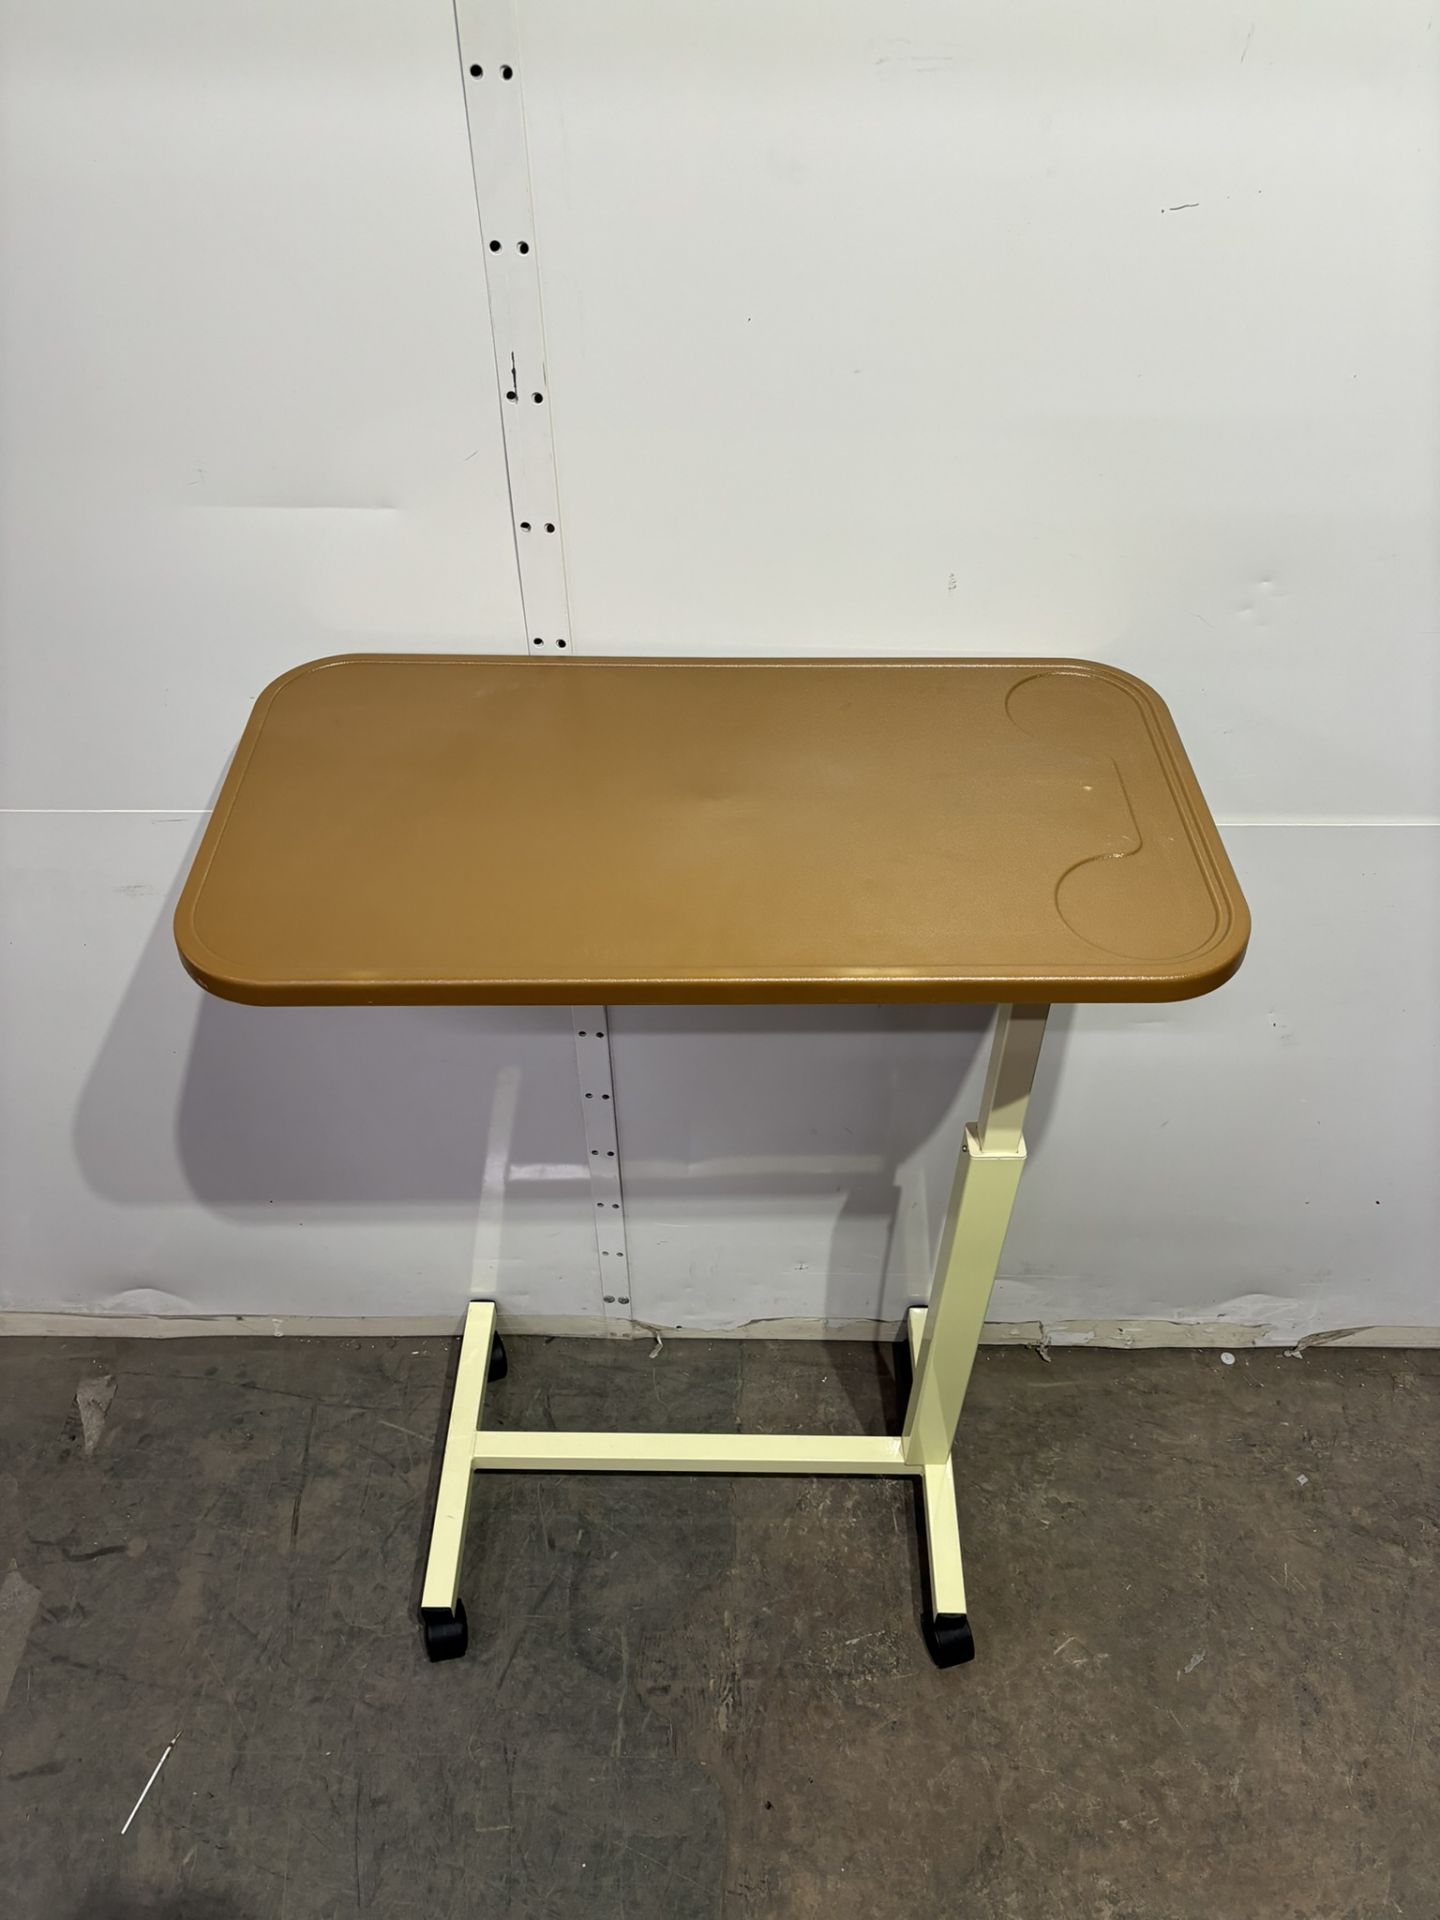 Perfomance Health Mobile Adjustable Overbed Table - Image 2 of 4